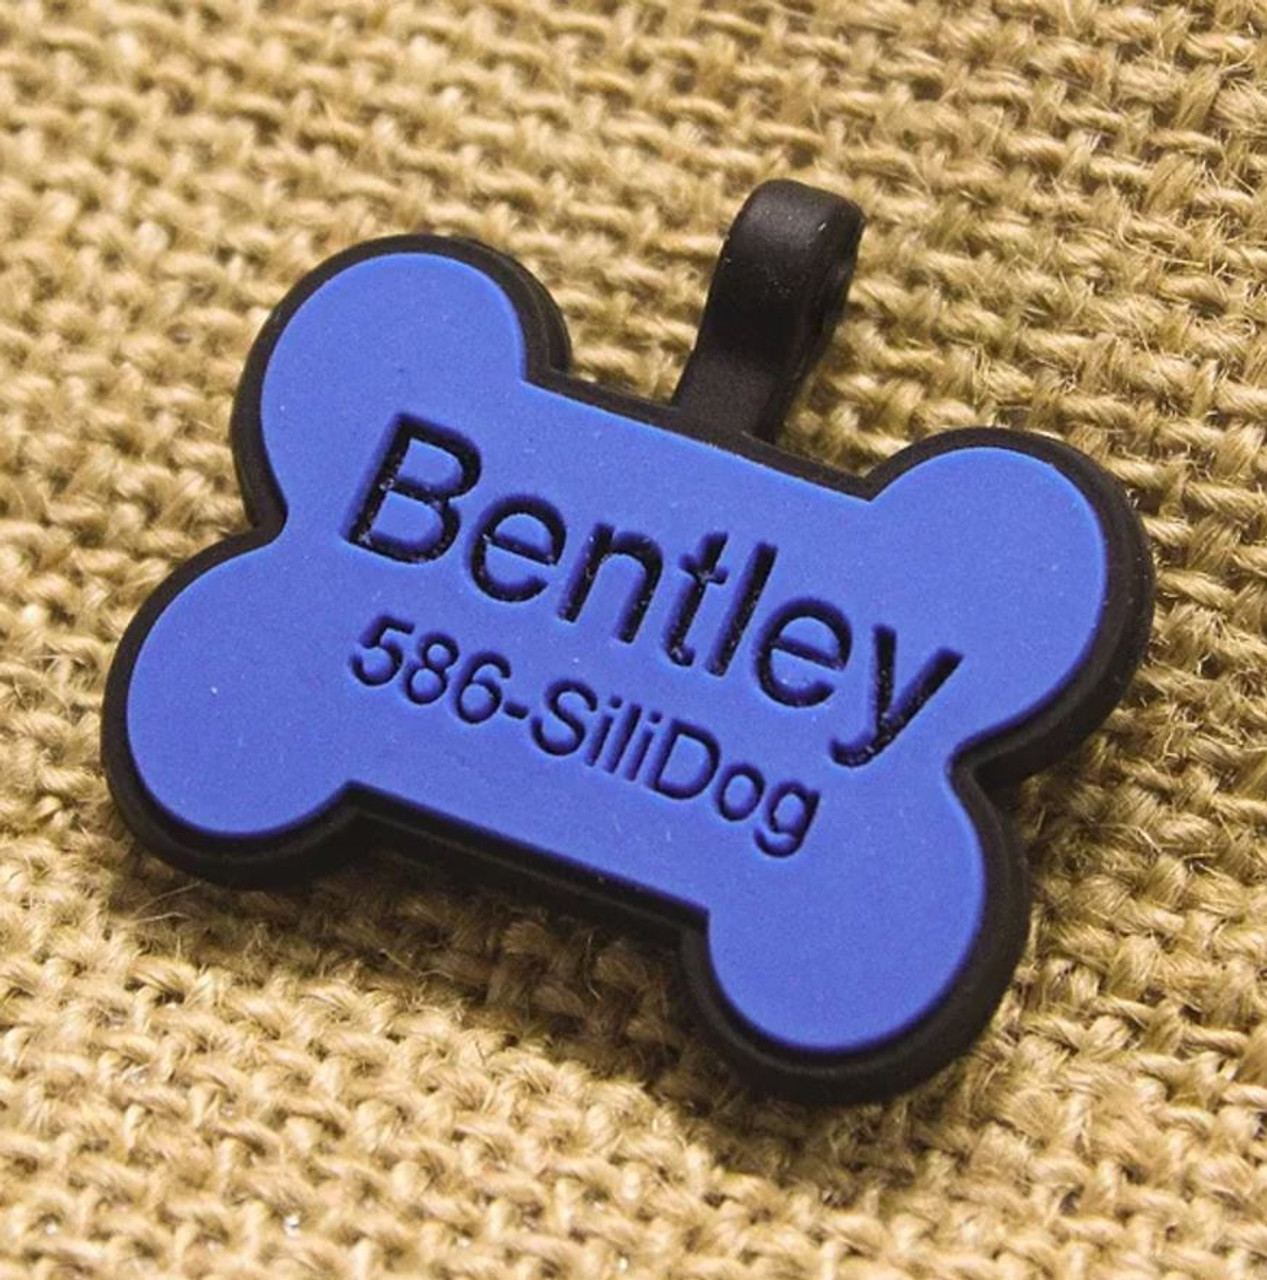 how can i make my dog tags quieter